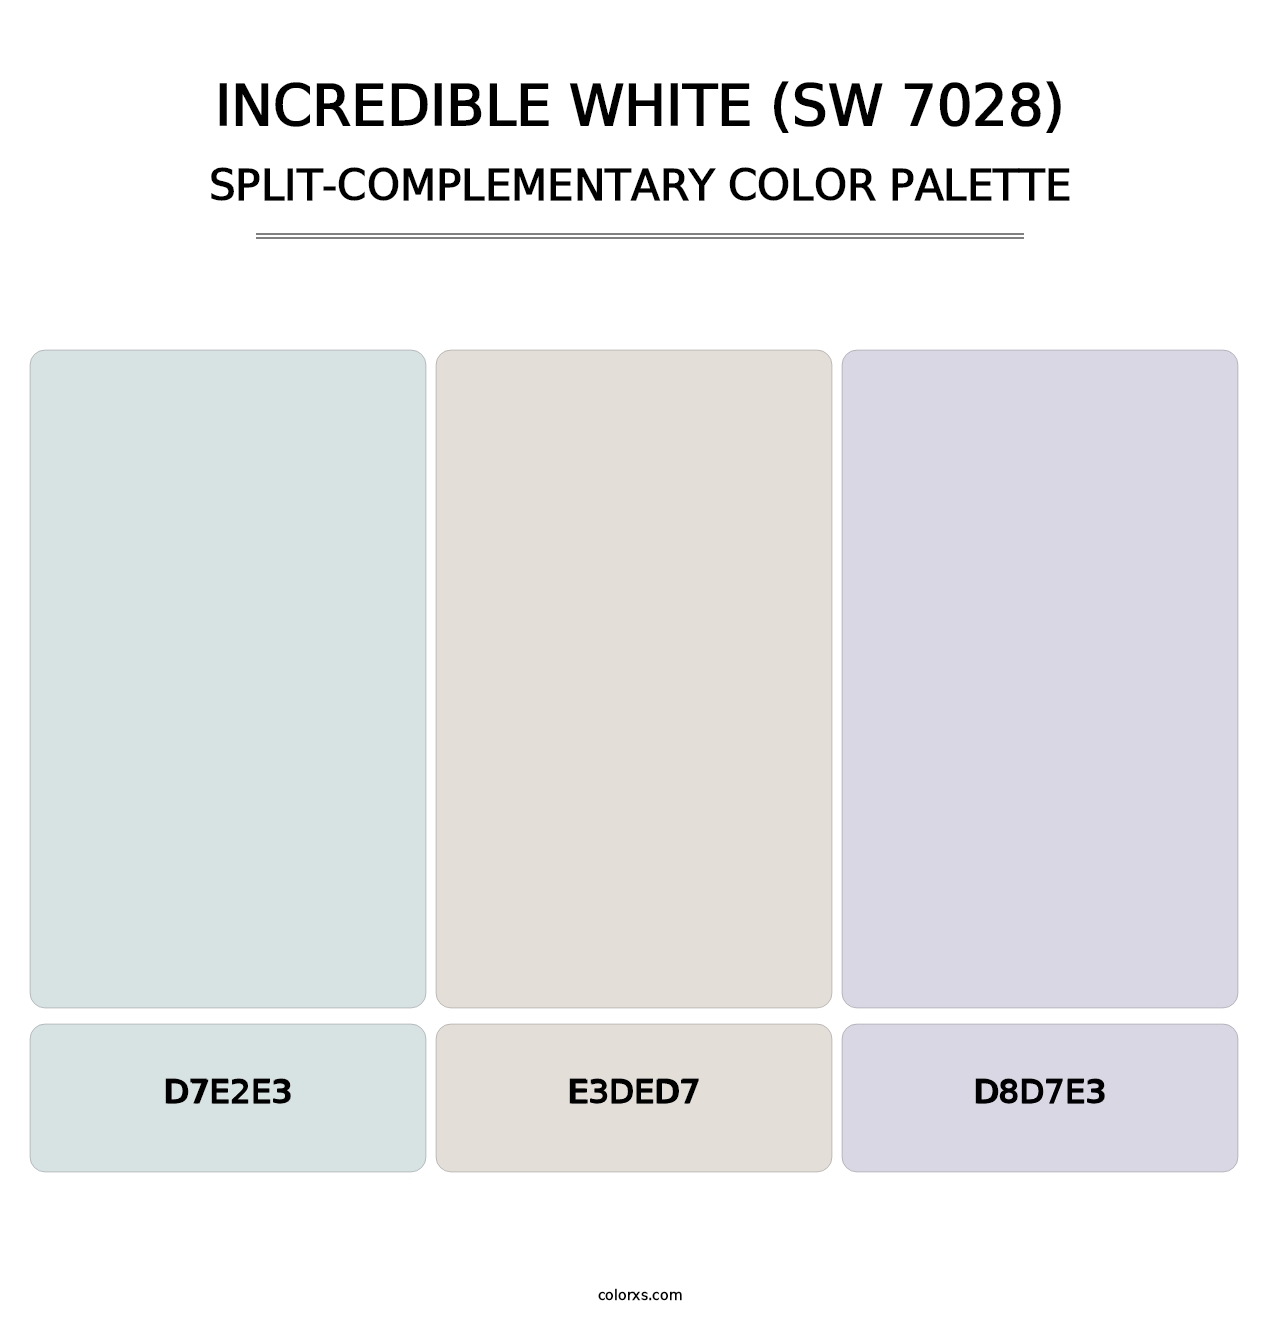 Incredible White (SW 7028) - Split-Complementary Color Palette